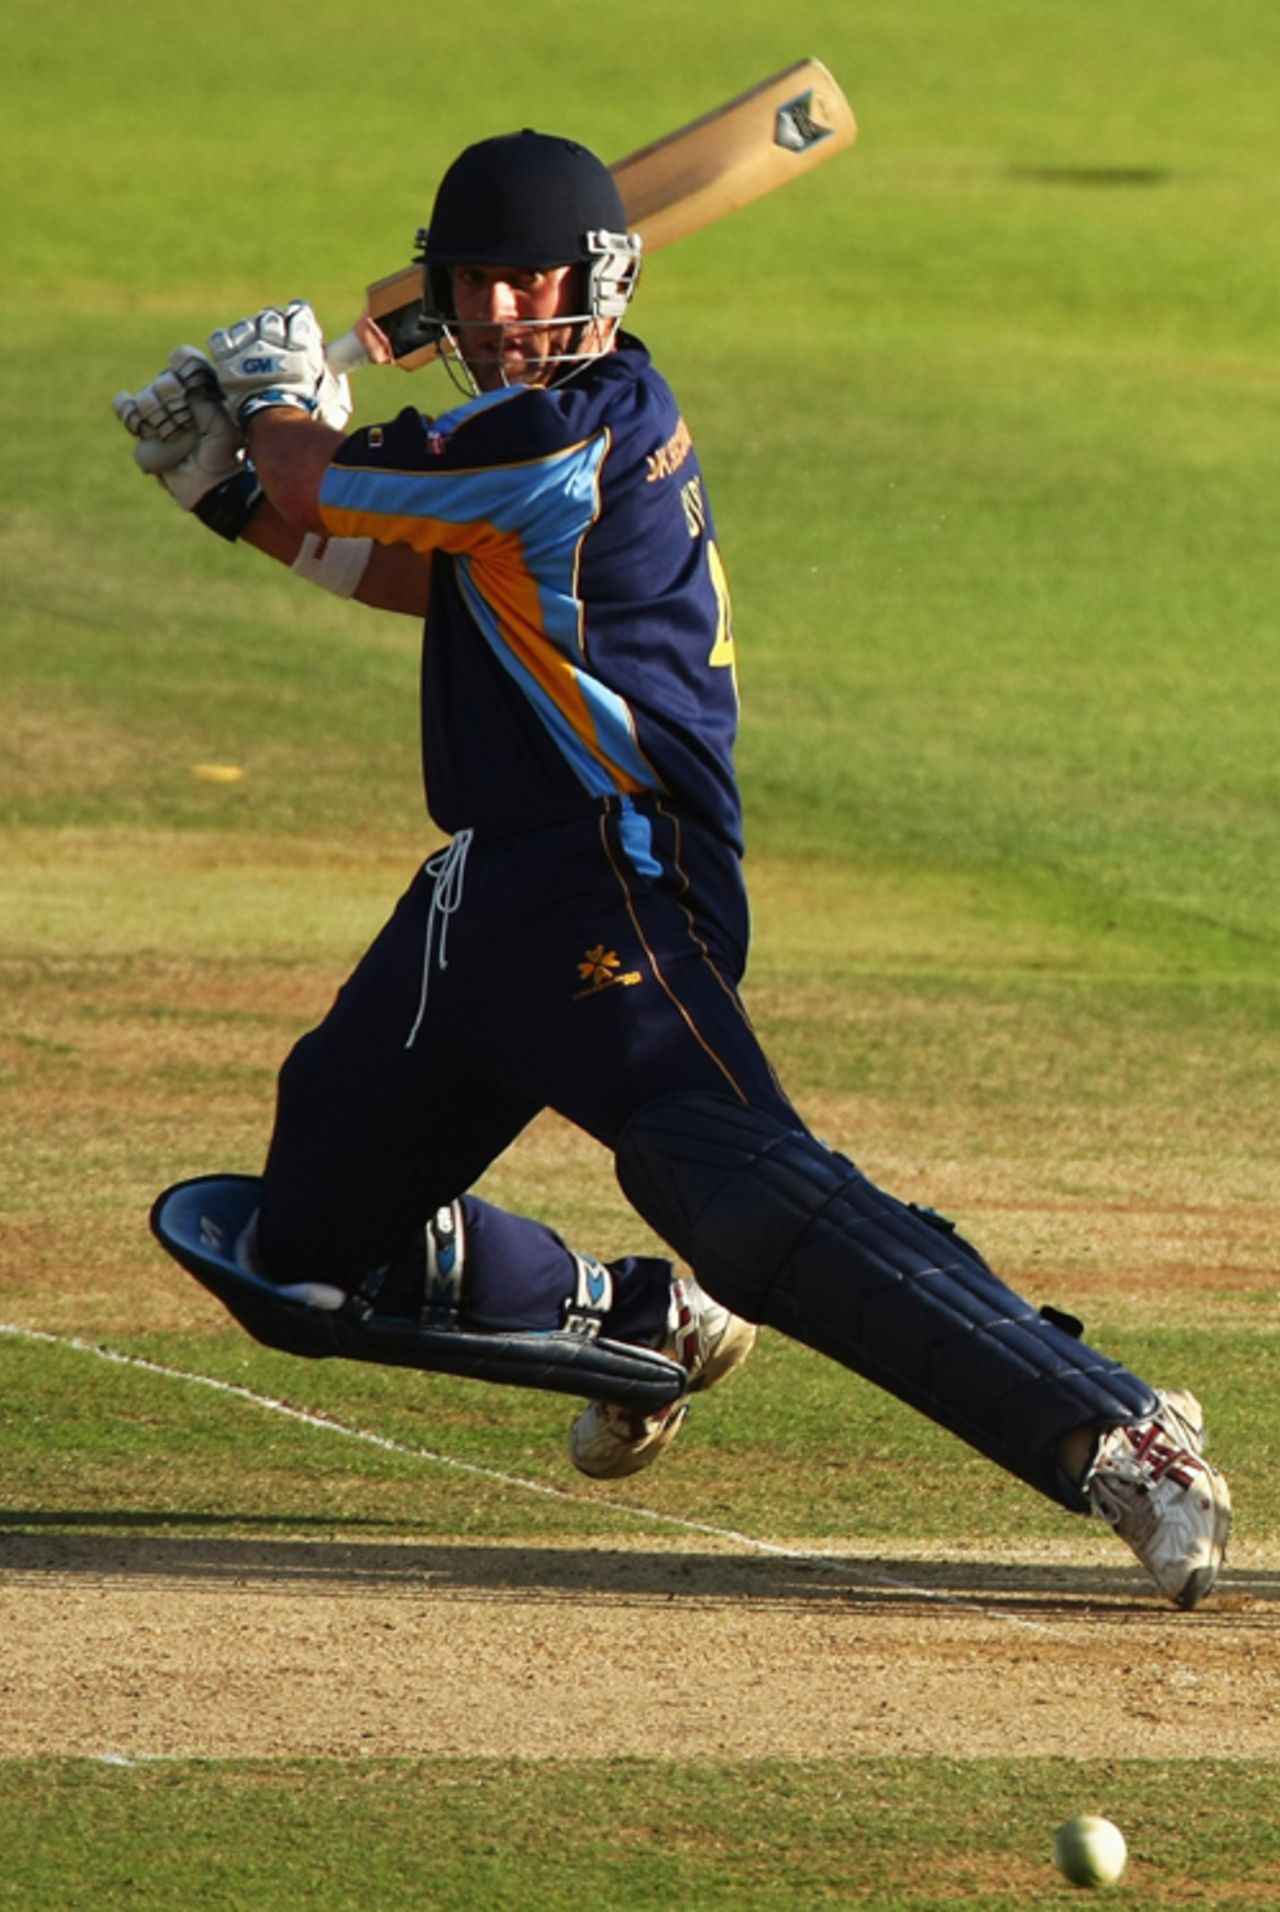 Travis Birt on his way to 47, Middlesex v Derbyshire, Pro40, Lord's, September 10, 2007